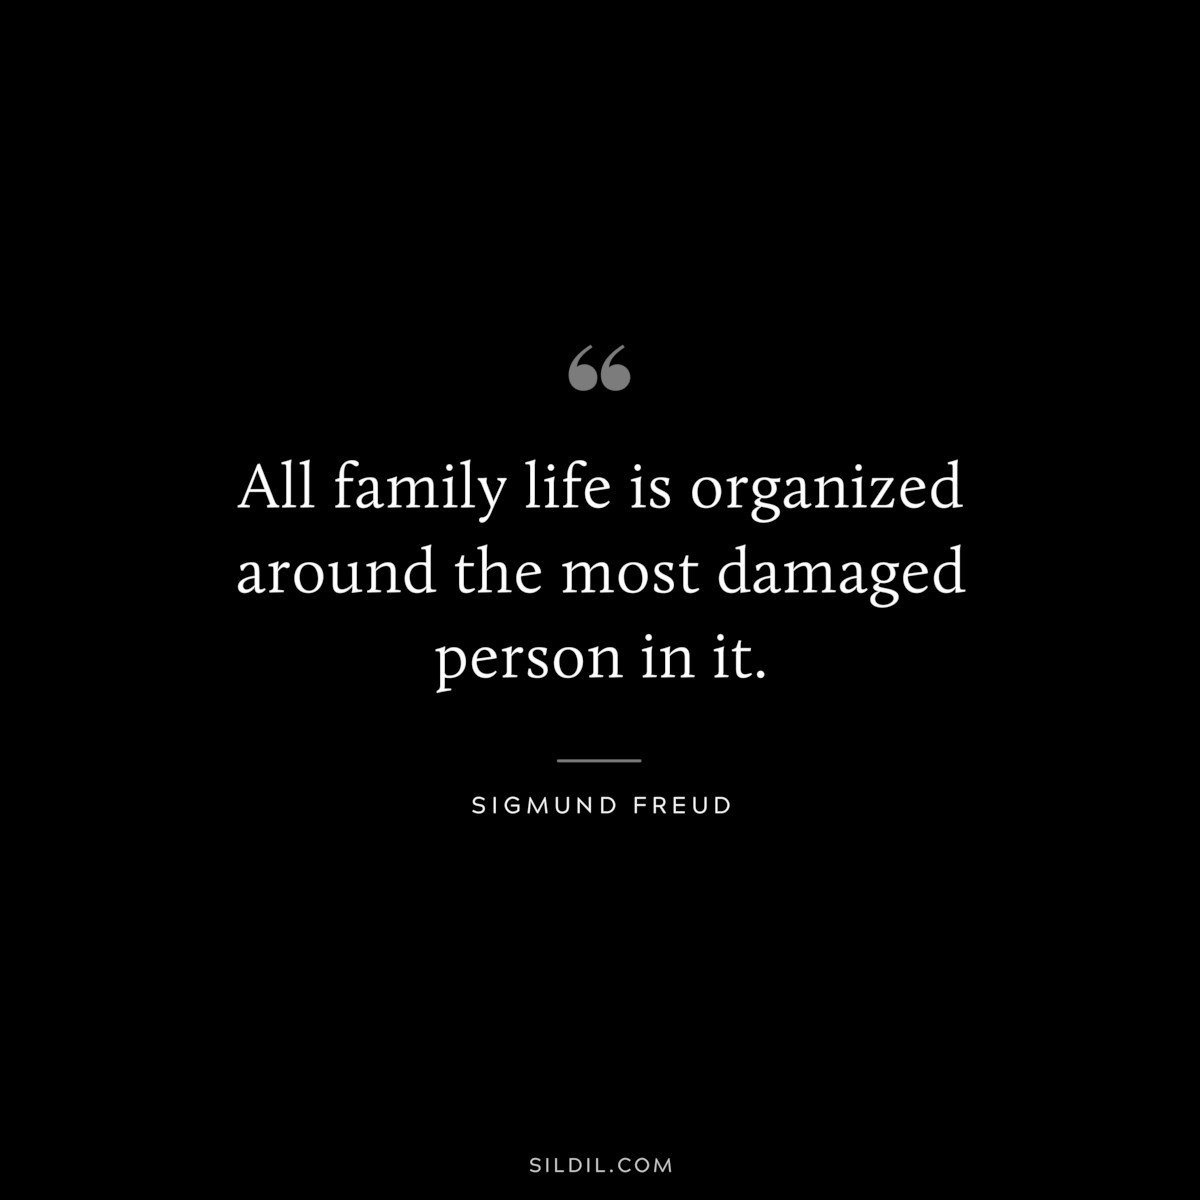 All family life is organized around the most damaged person in it. ― Sigmund Frued